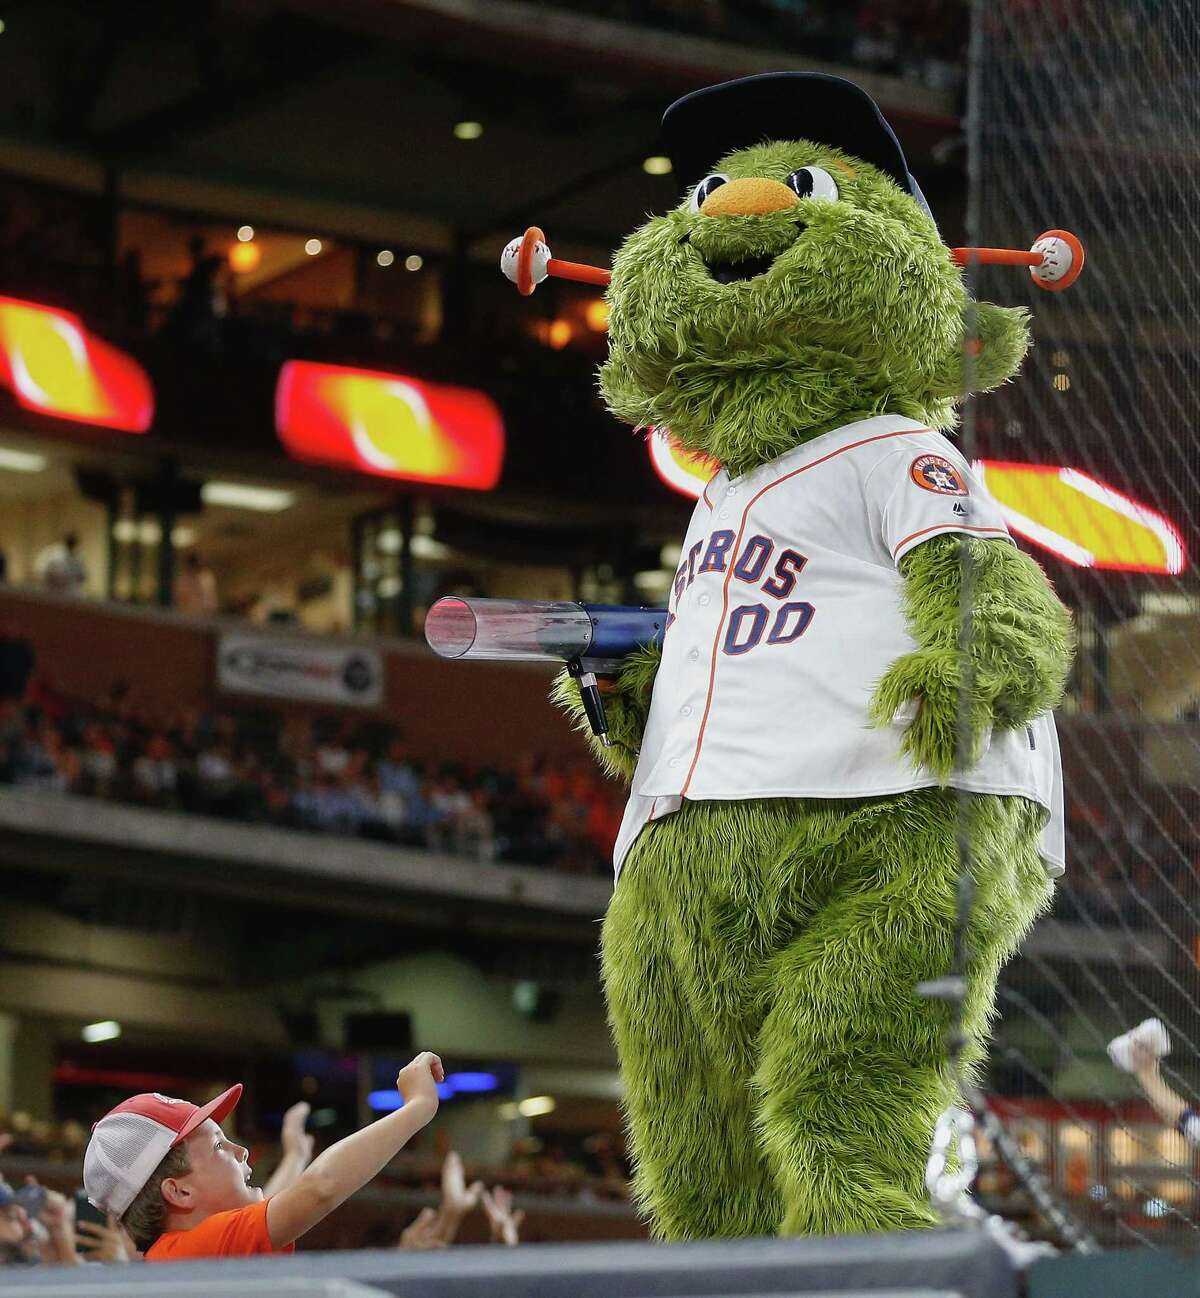 Astros mascot Orbit faced a hilarious awkward moment after Kate Upton's fiance became part of the Astros due to a high-profile trade. >> See 25 reasons to love Kate Upton.